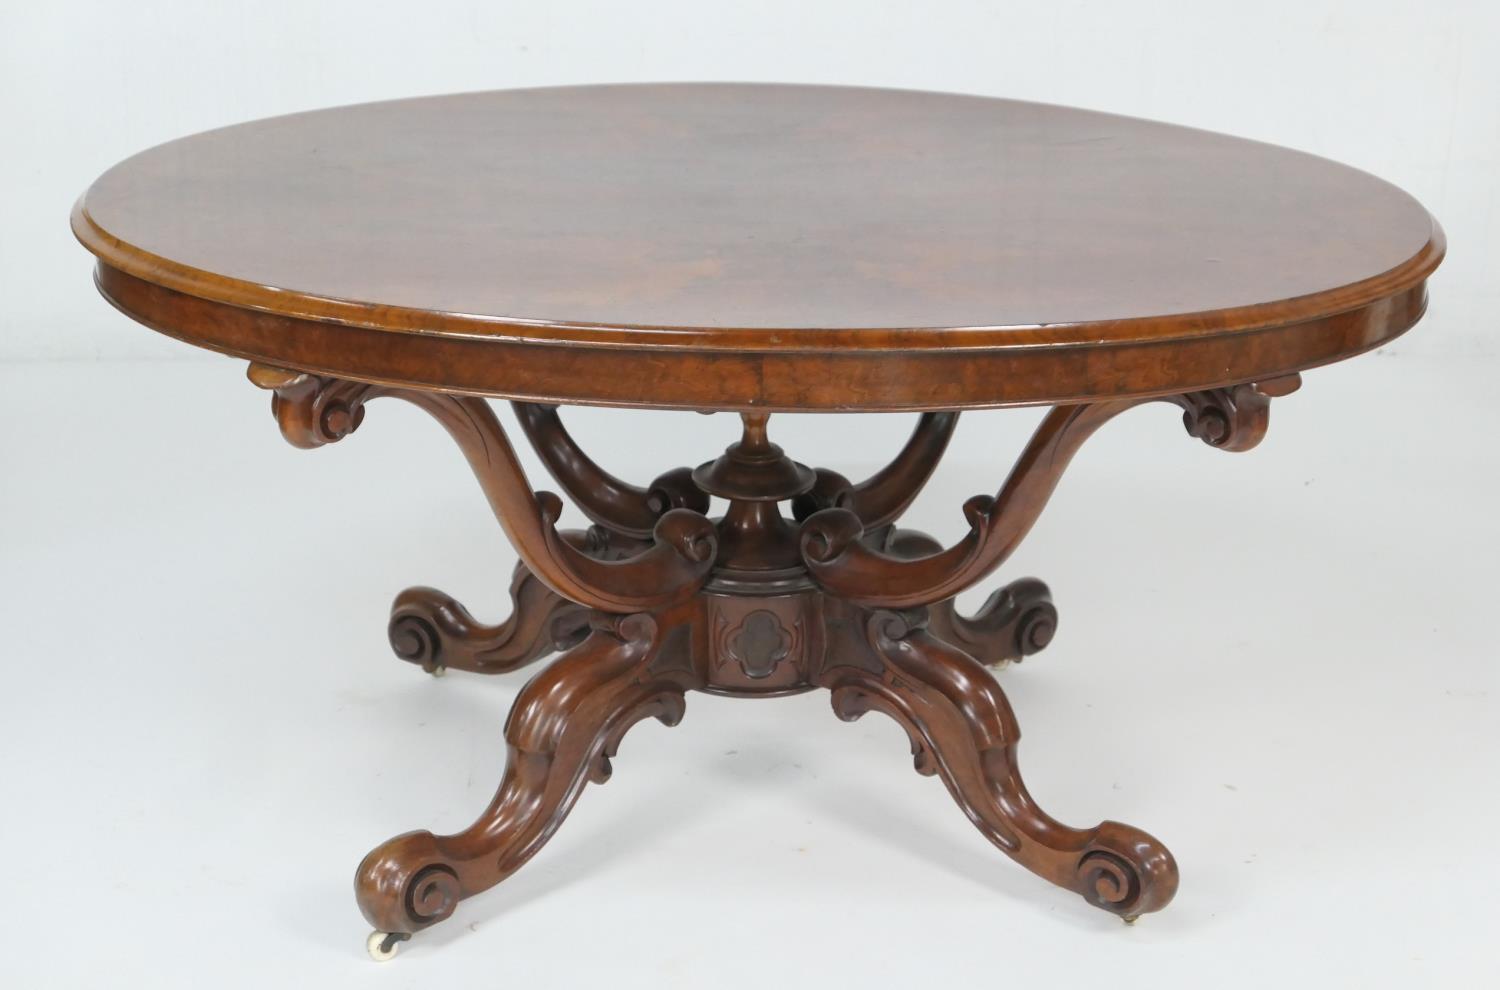 Victorian burr walnut breakfast or supper table, circa 1840-60, the finely figured quarter